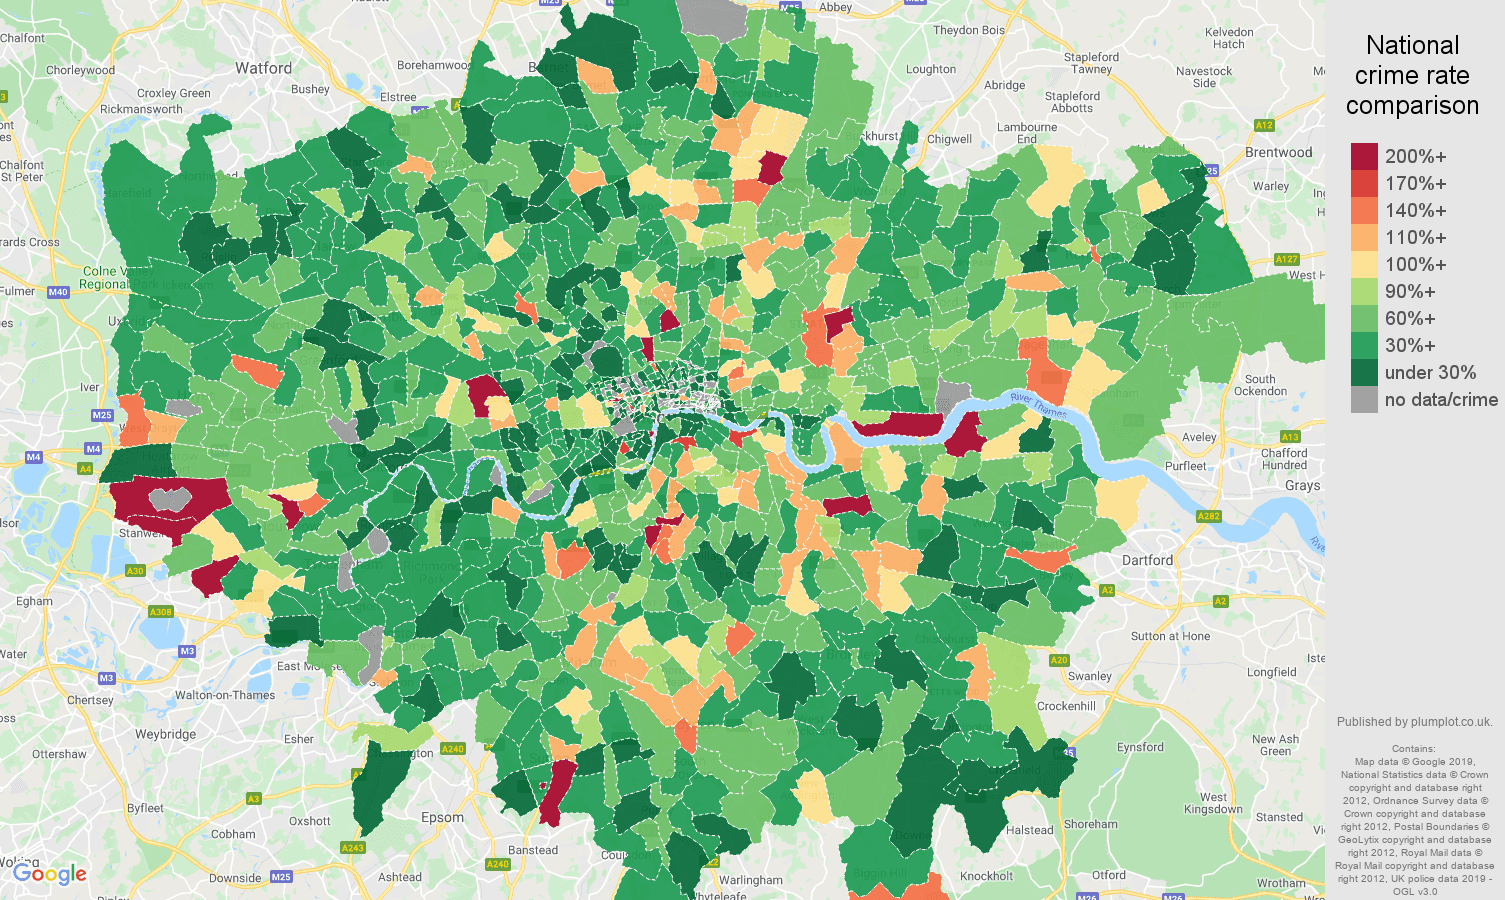 London other crime rate comparison map